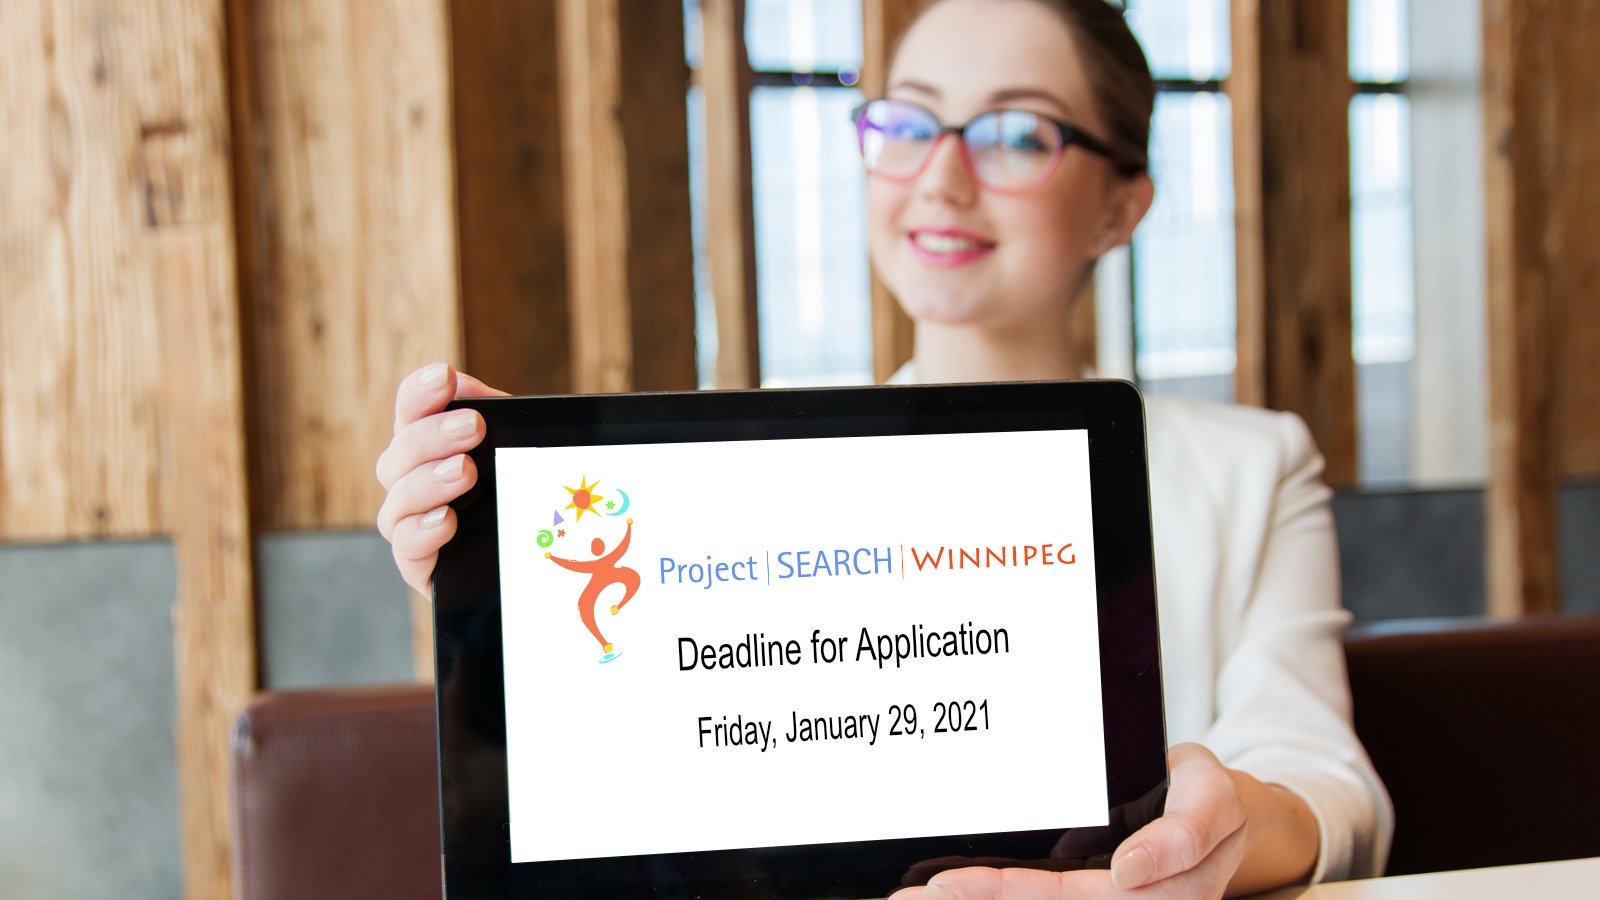 Person holding a tablet that says Project Search Winnipeg Deadline for Application Friday, January 29th, 2021